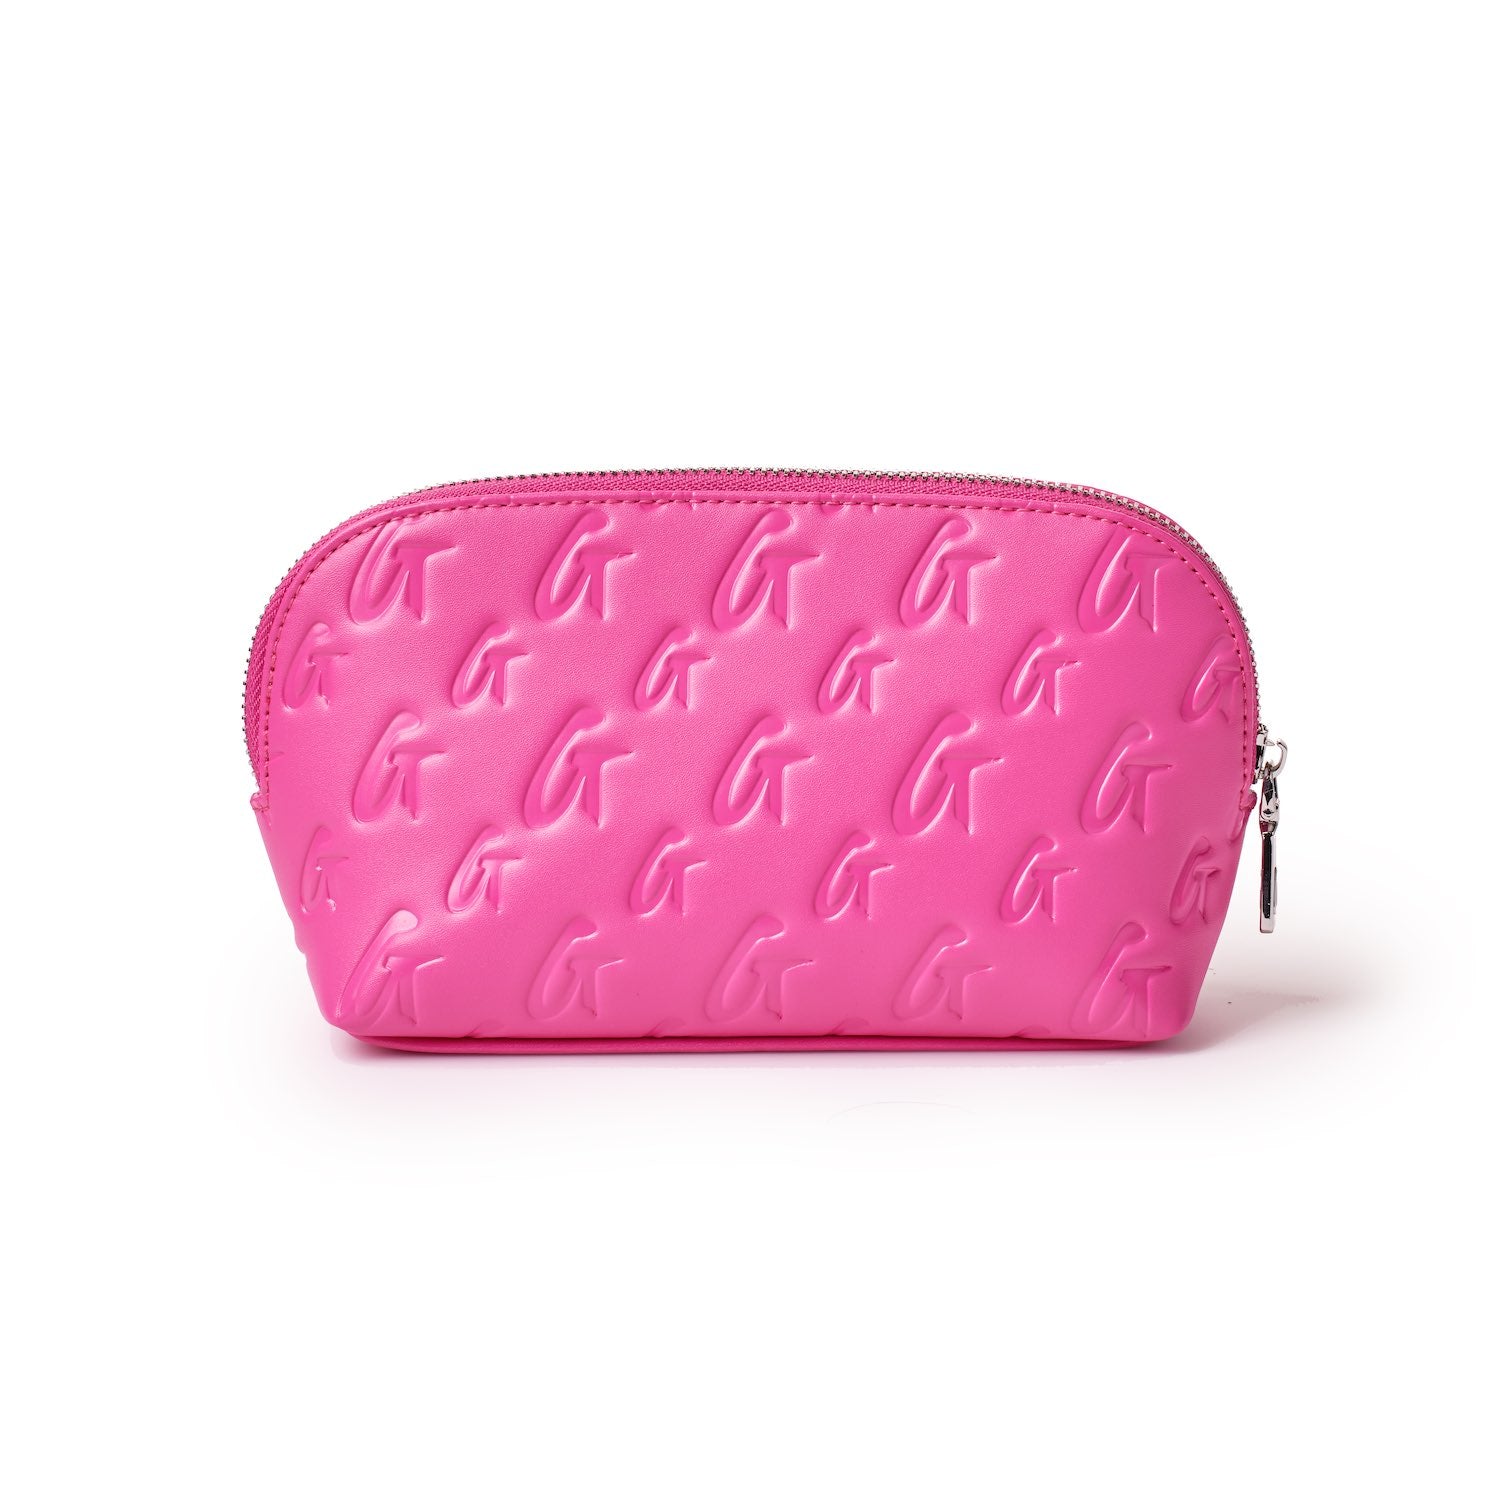 MONOGRAM COSMETIC POUCH HOT PINK